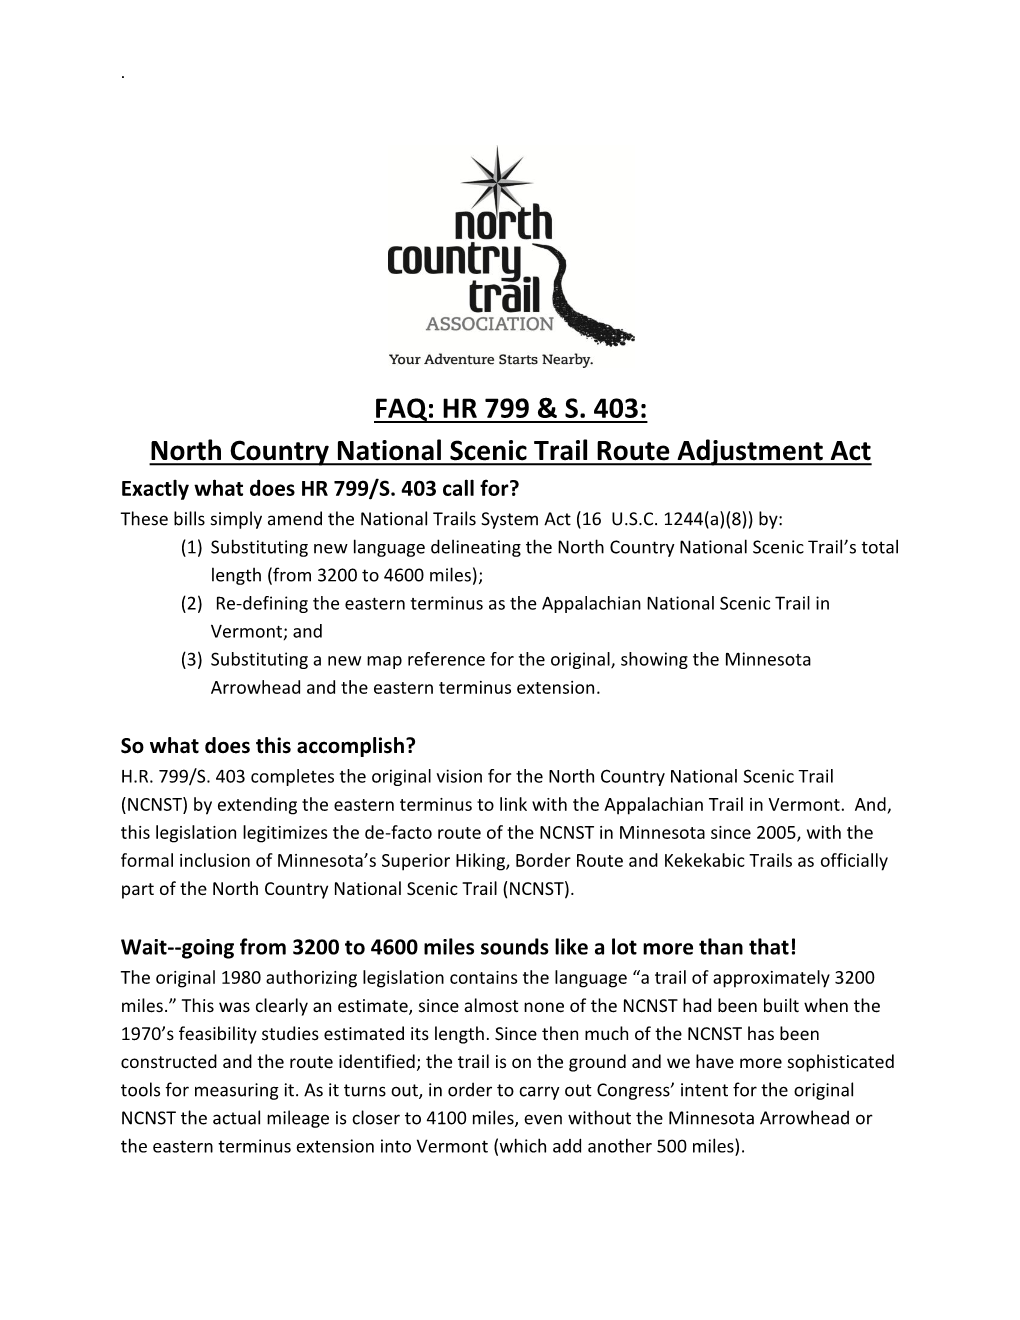 FAQ: HR 799 & S. 403: North Country National Scenic Trail Route Adjustment